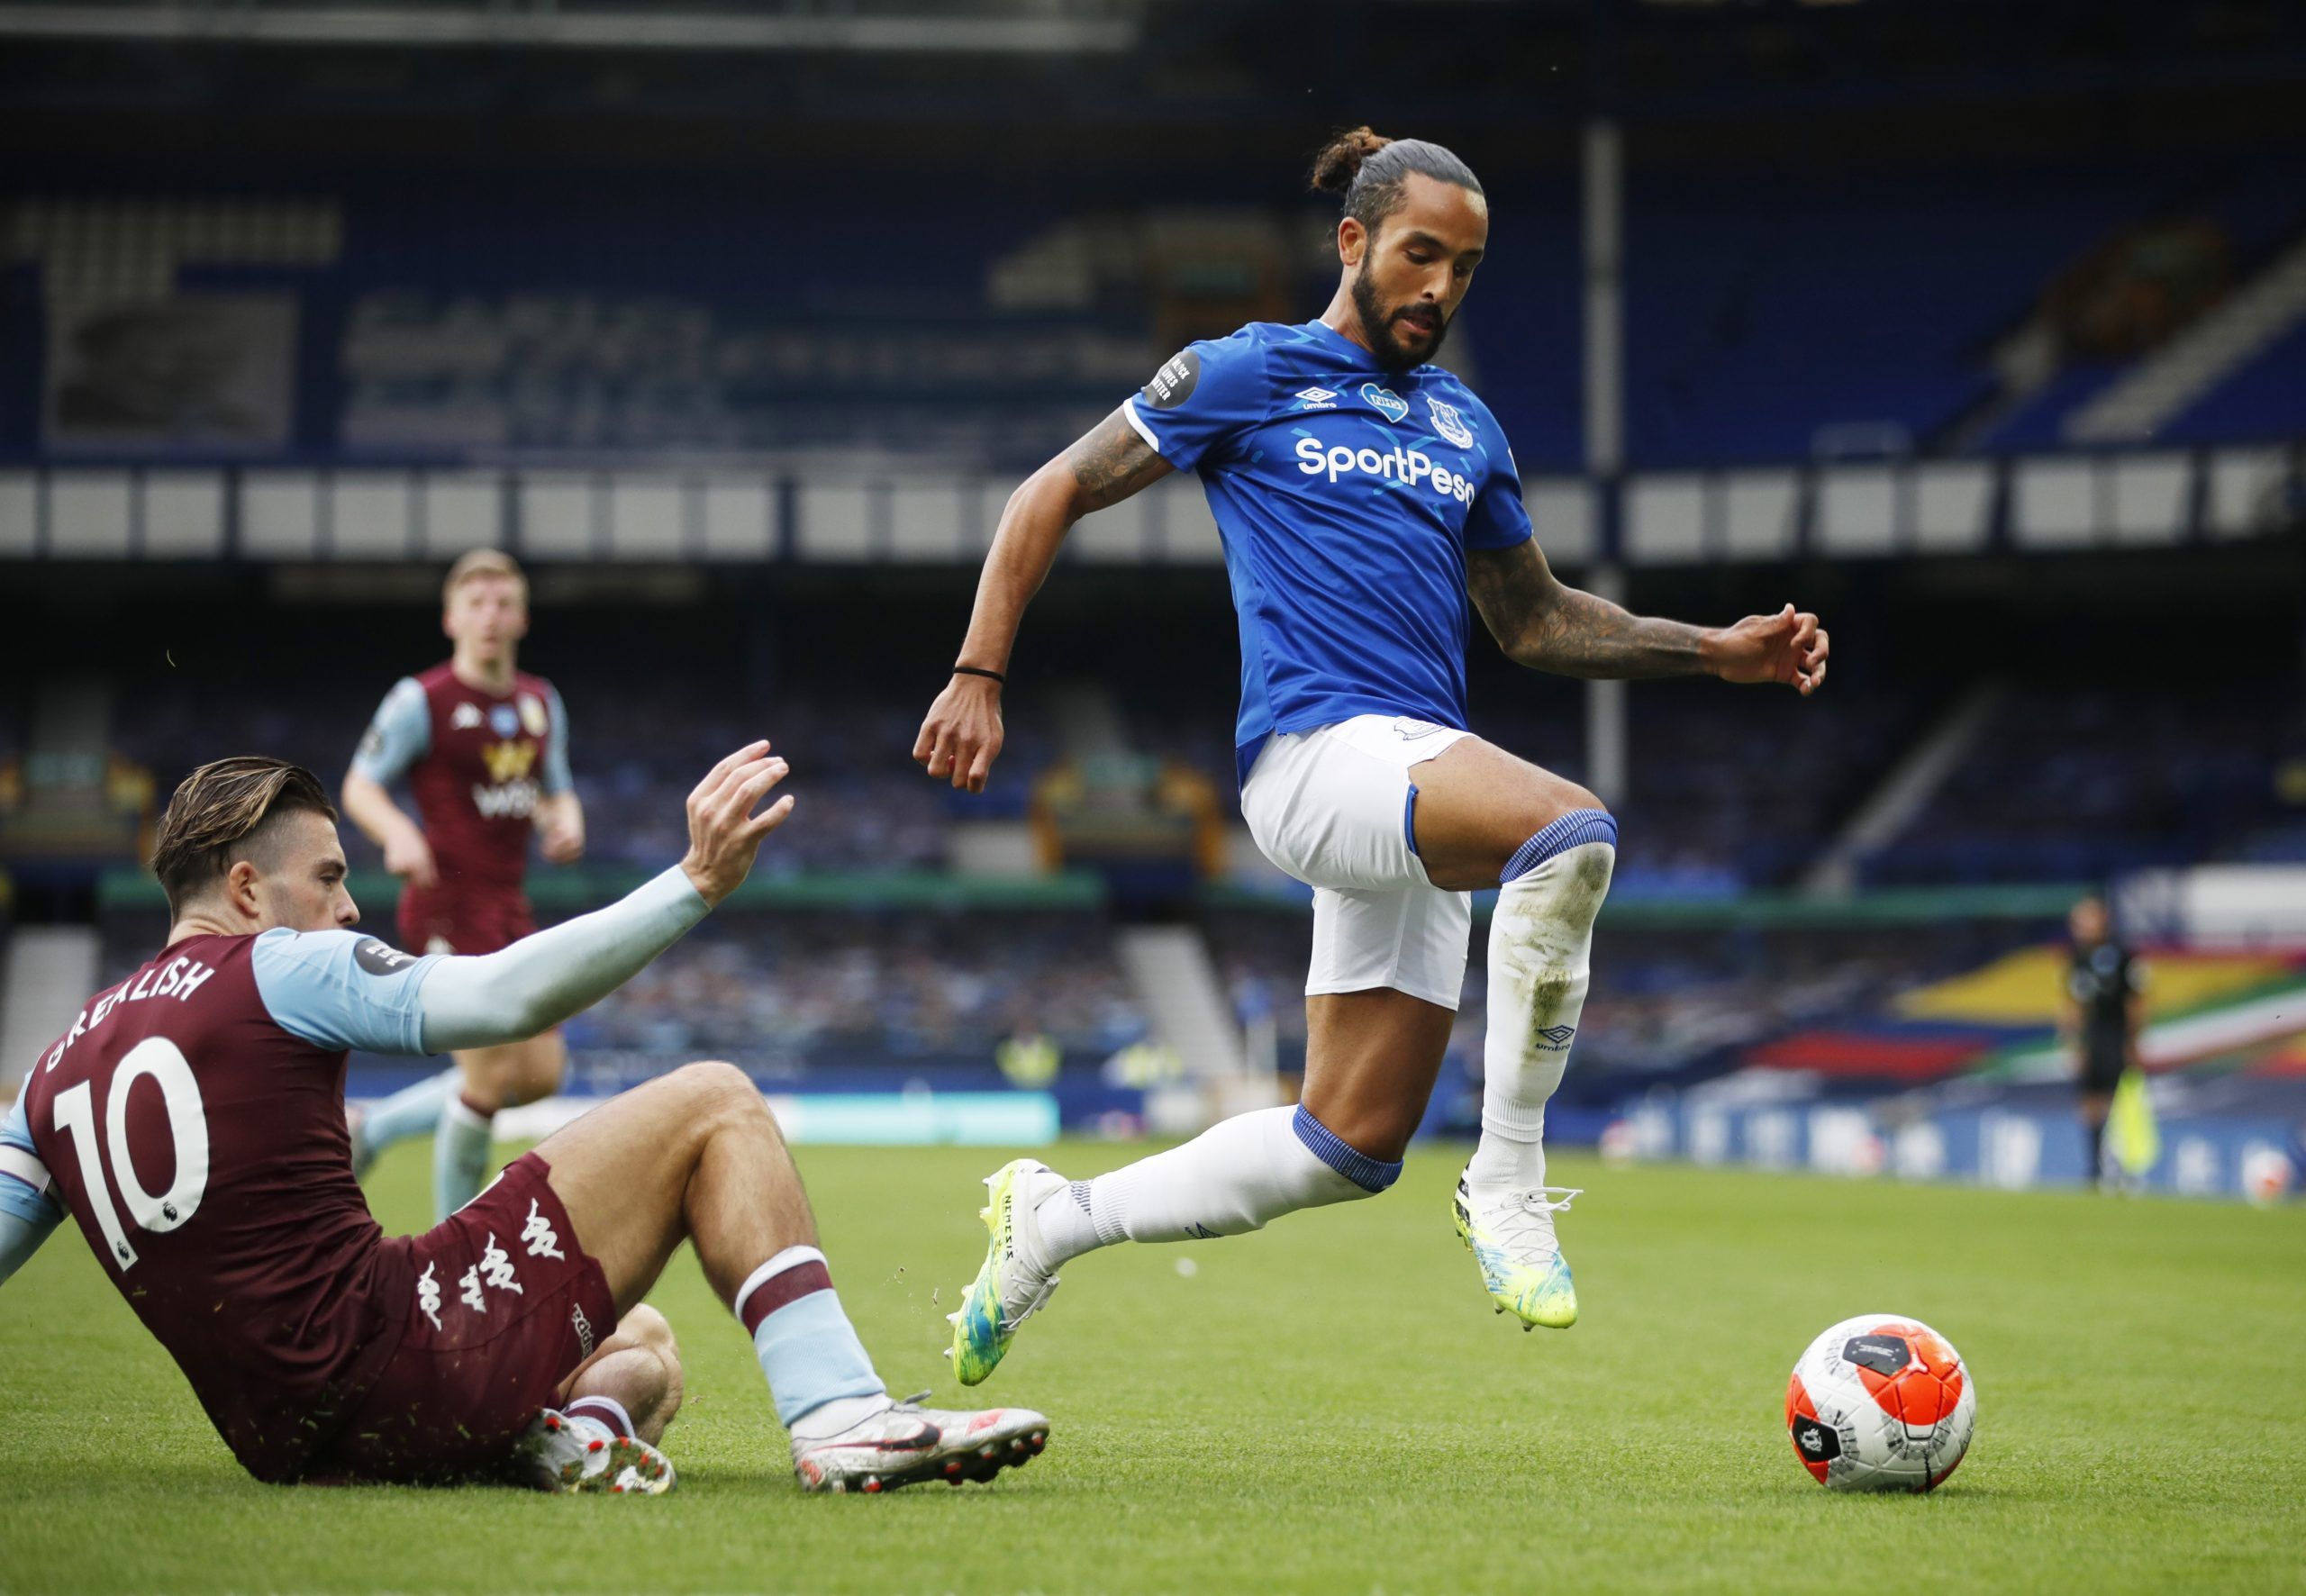 Soccer Football - Premier League - Everton v Aston Villa - Goodison Park, Liverpool, Britain - July 16, 2020 Everton's Theo Walcott in action with Aston Villa's Jack Grealish, as play resumes behind closed doors following the outbreak of the coronavirus disease (COVID-19) Pool via REUTERS/Clive Brunskill EDITORIAL USE ONLY. No use with unauthorized audio, video, data, fixture lists, club/league logos or 'live' services. Online in-match use limited to 75 images, no video emulation. No use in bett